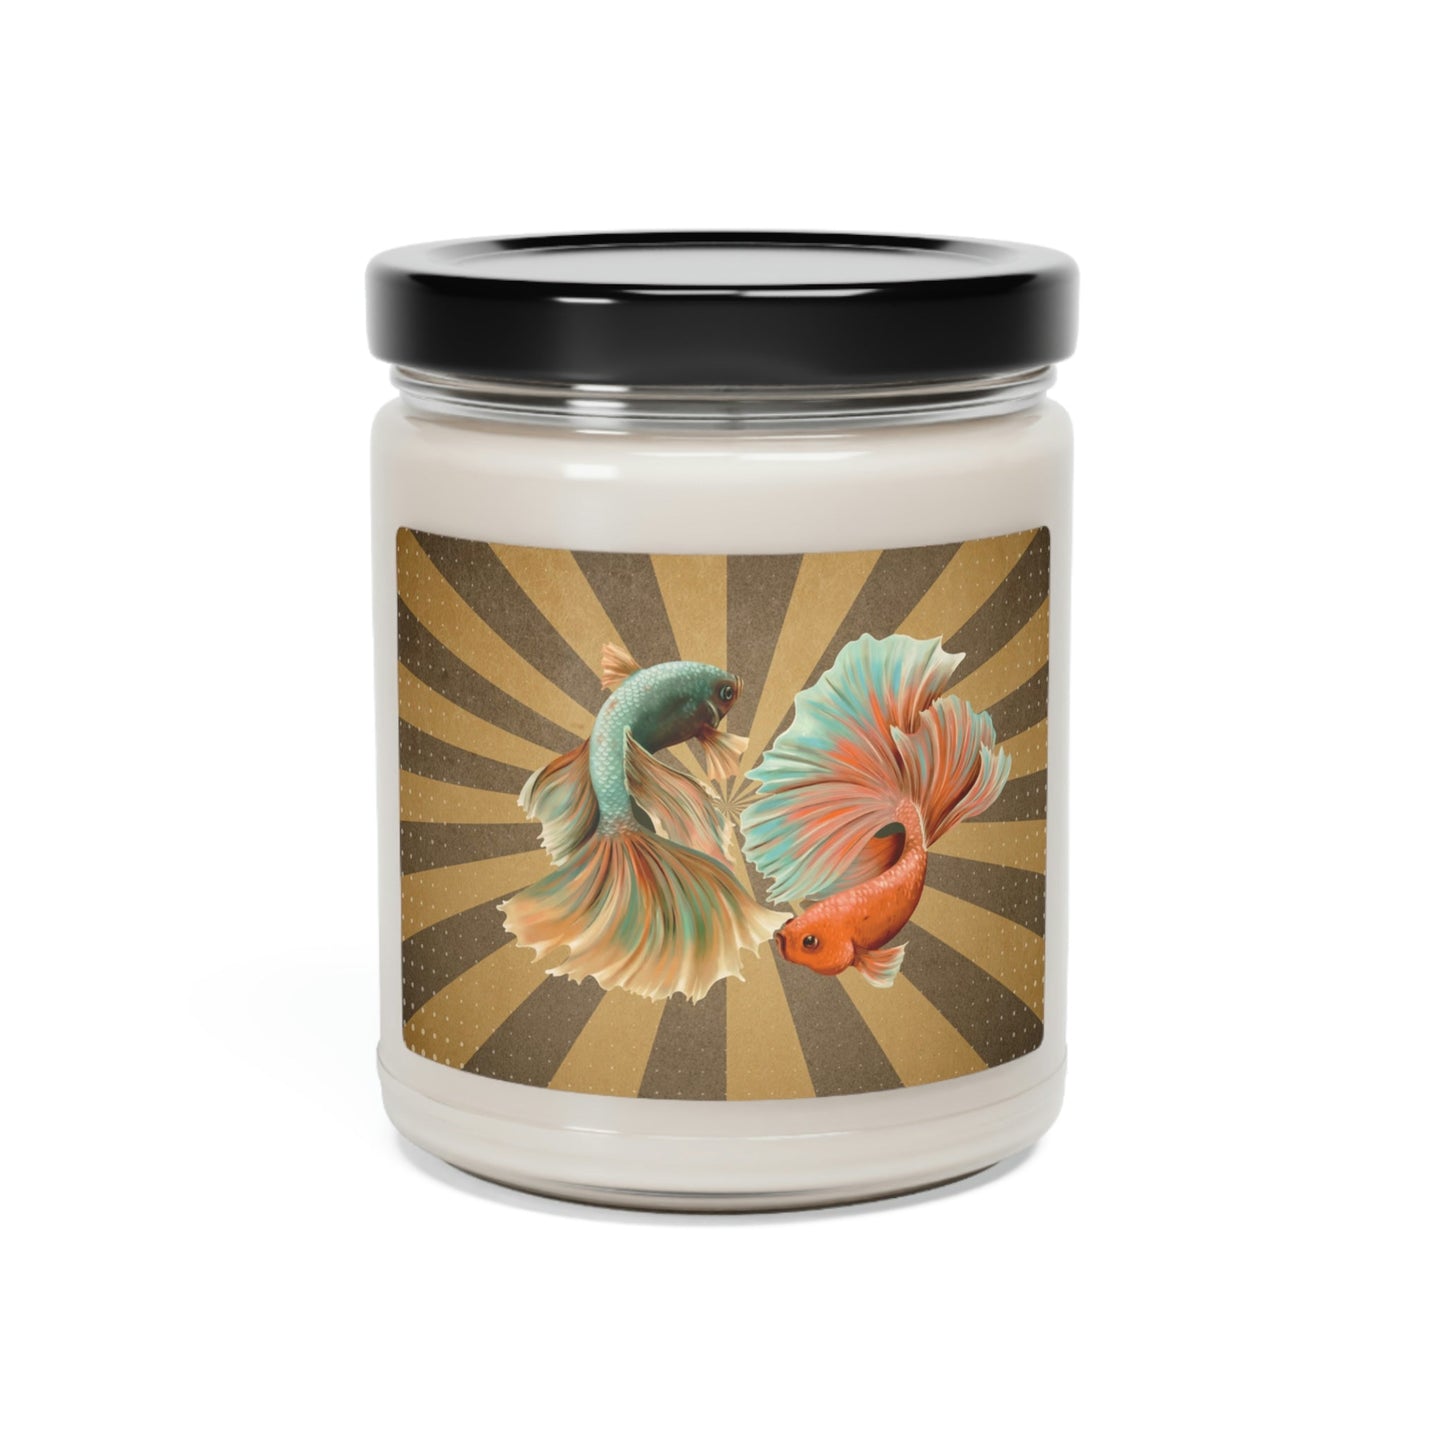 Siamese Fighting Fish Scented Soy Candle - 9oz